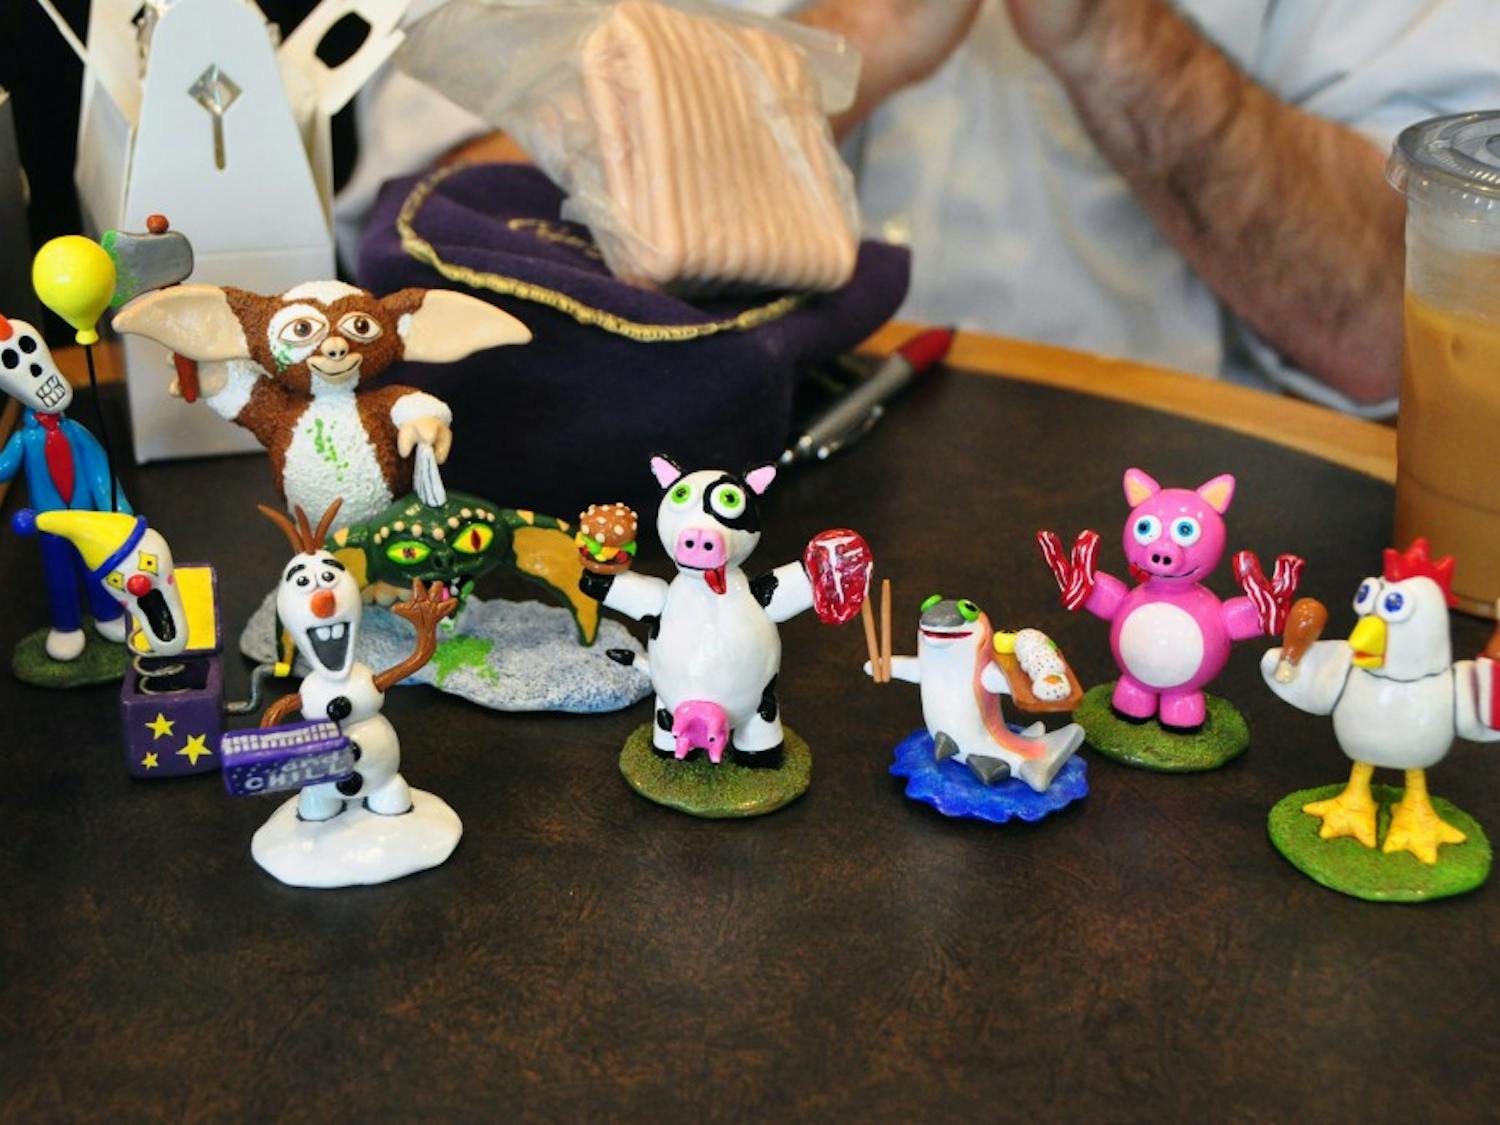 Ari Gutman, Auburn University lecturer, creates miniature sculptures outside of work, giving many of them away to friends.